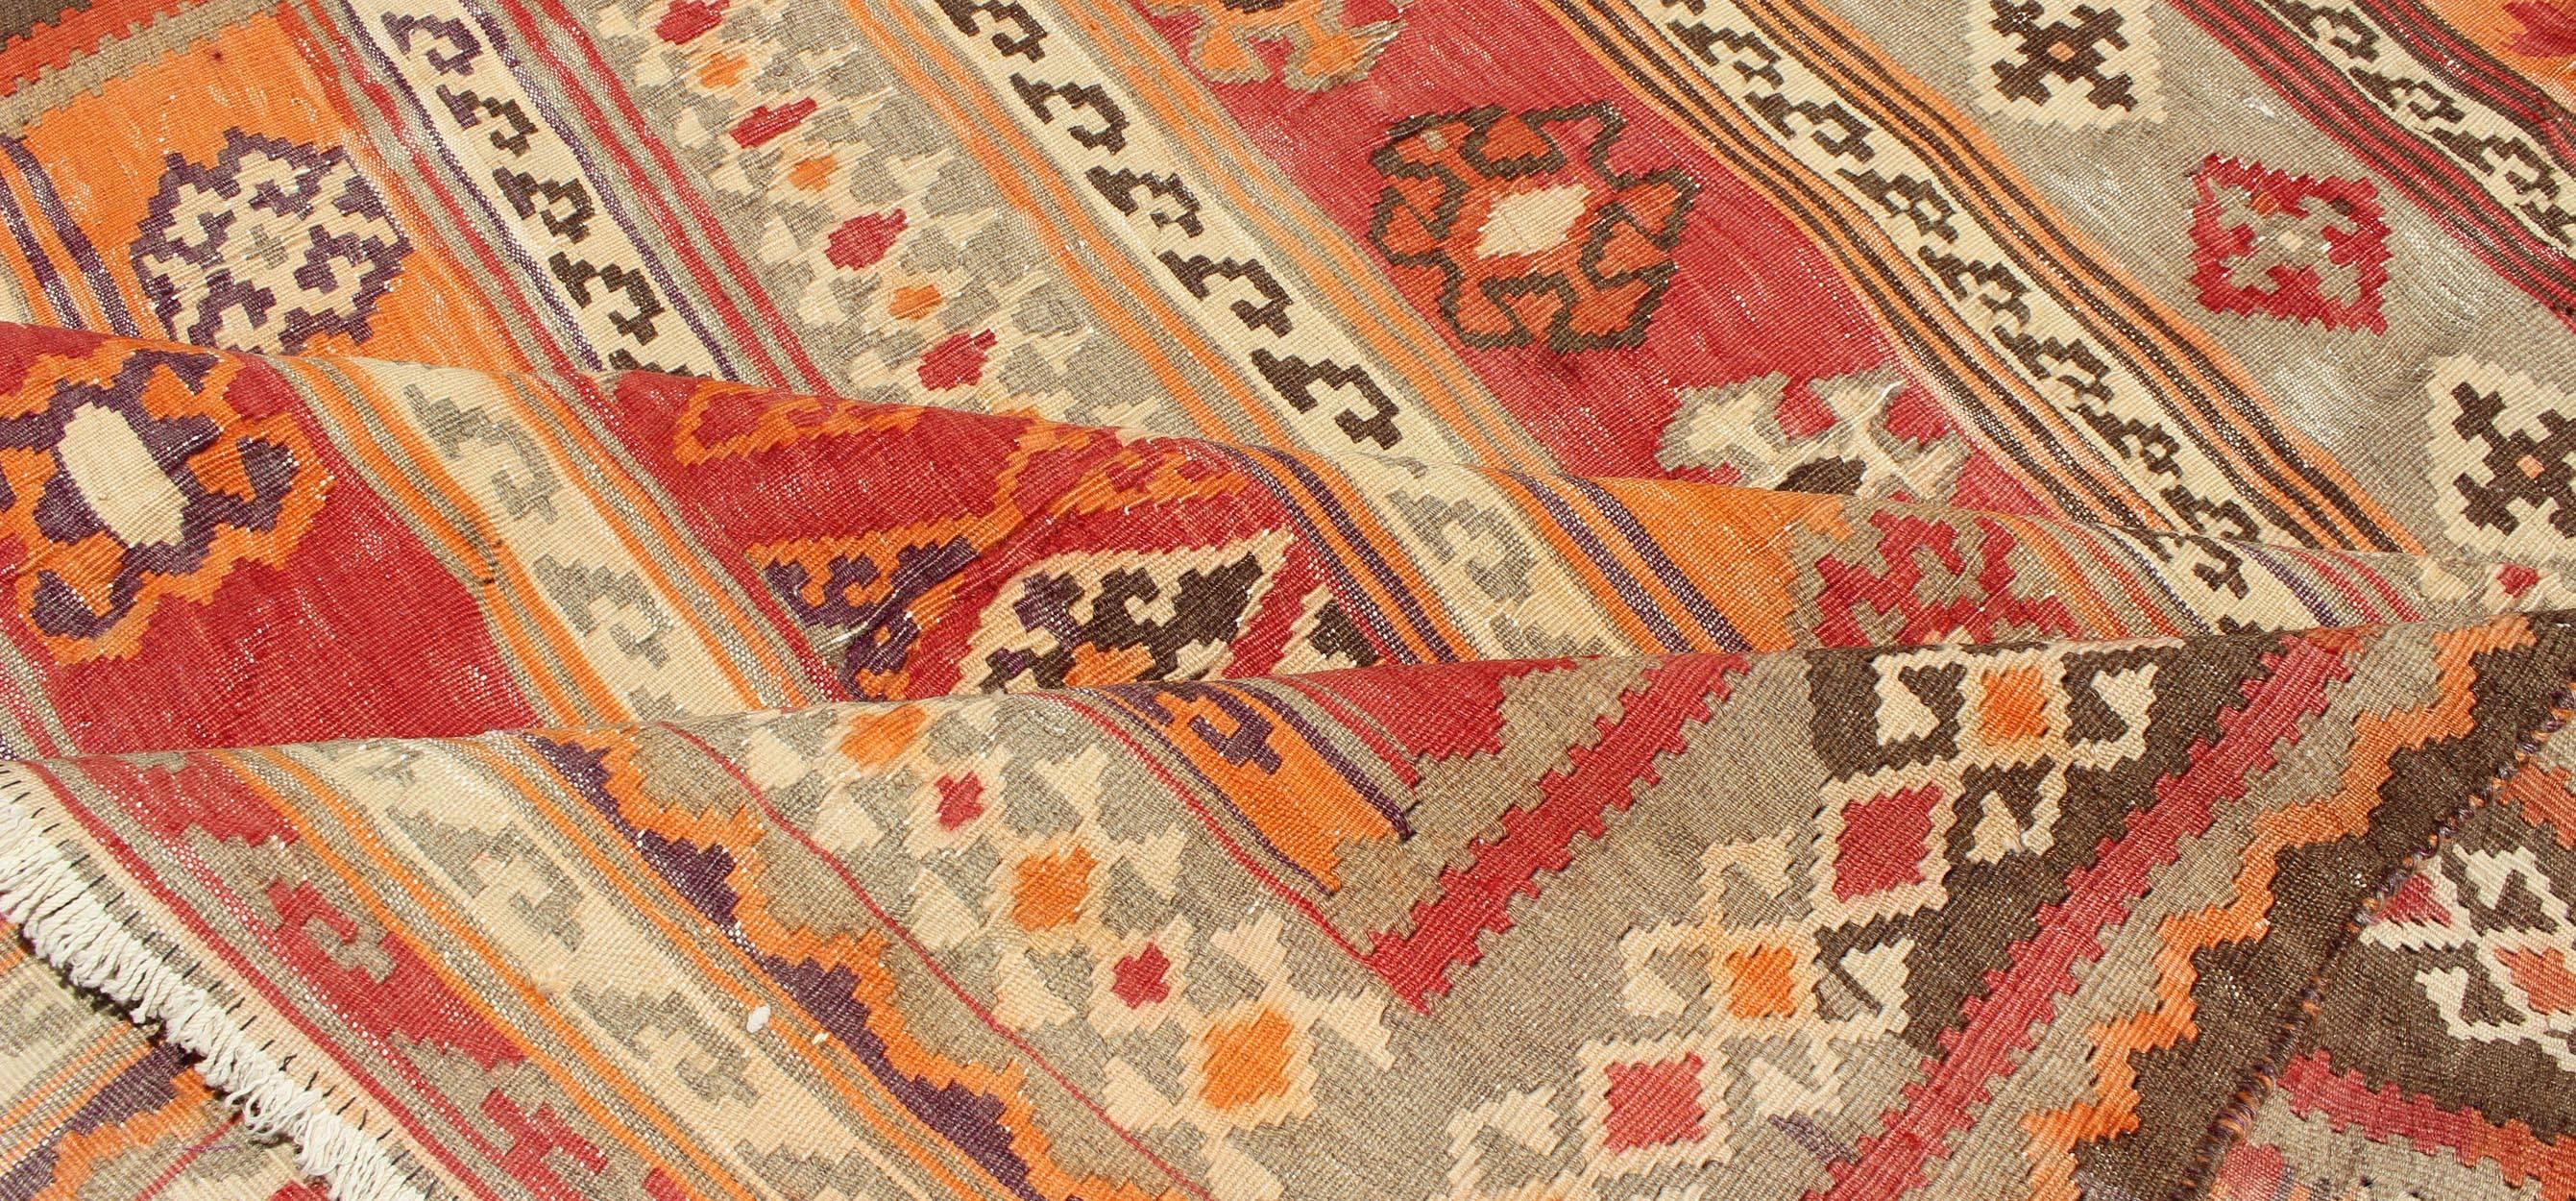 20th Century Antique Moroccan Kilim with Embroidery in Red, Orange, Gray and Brown For Sale